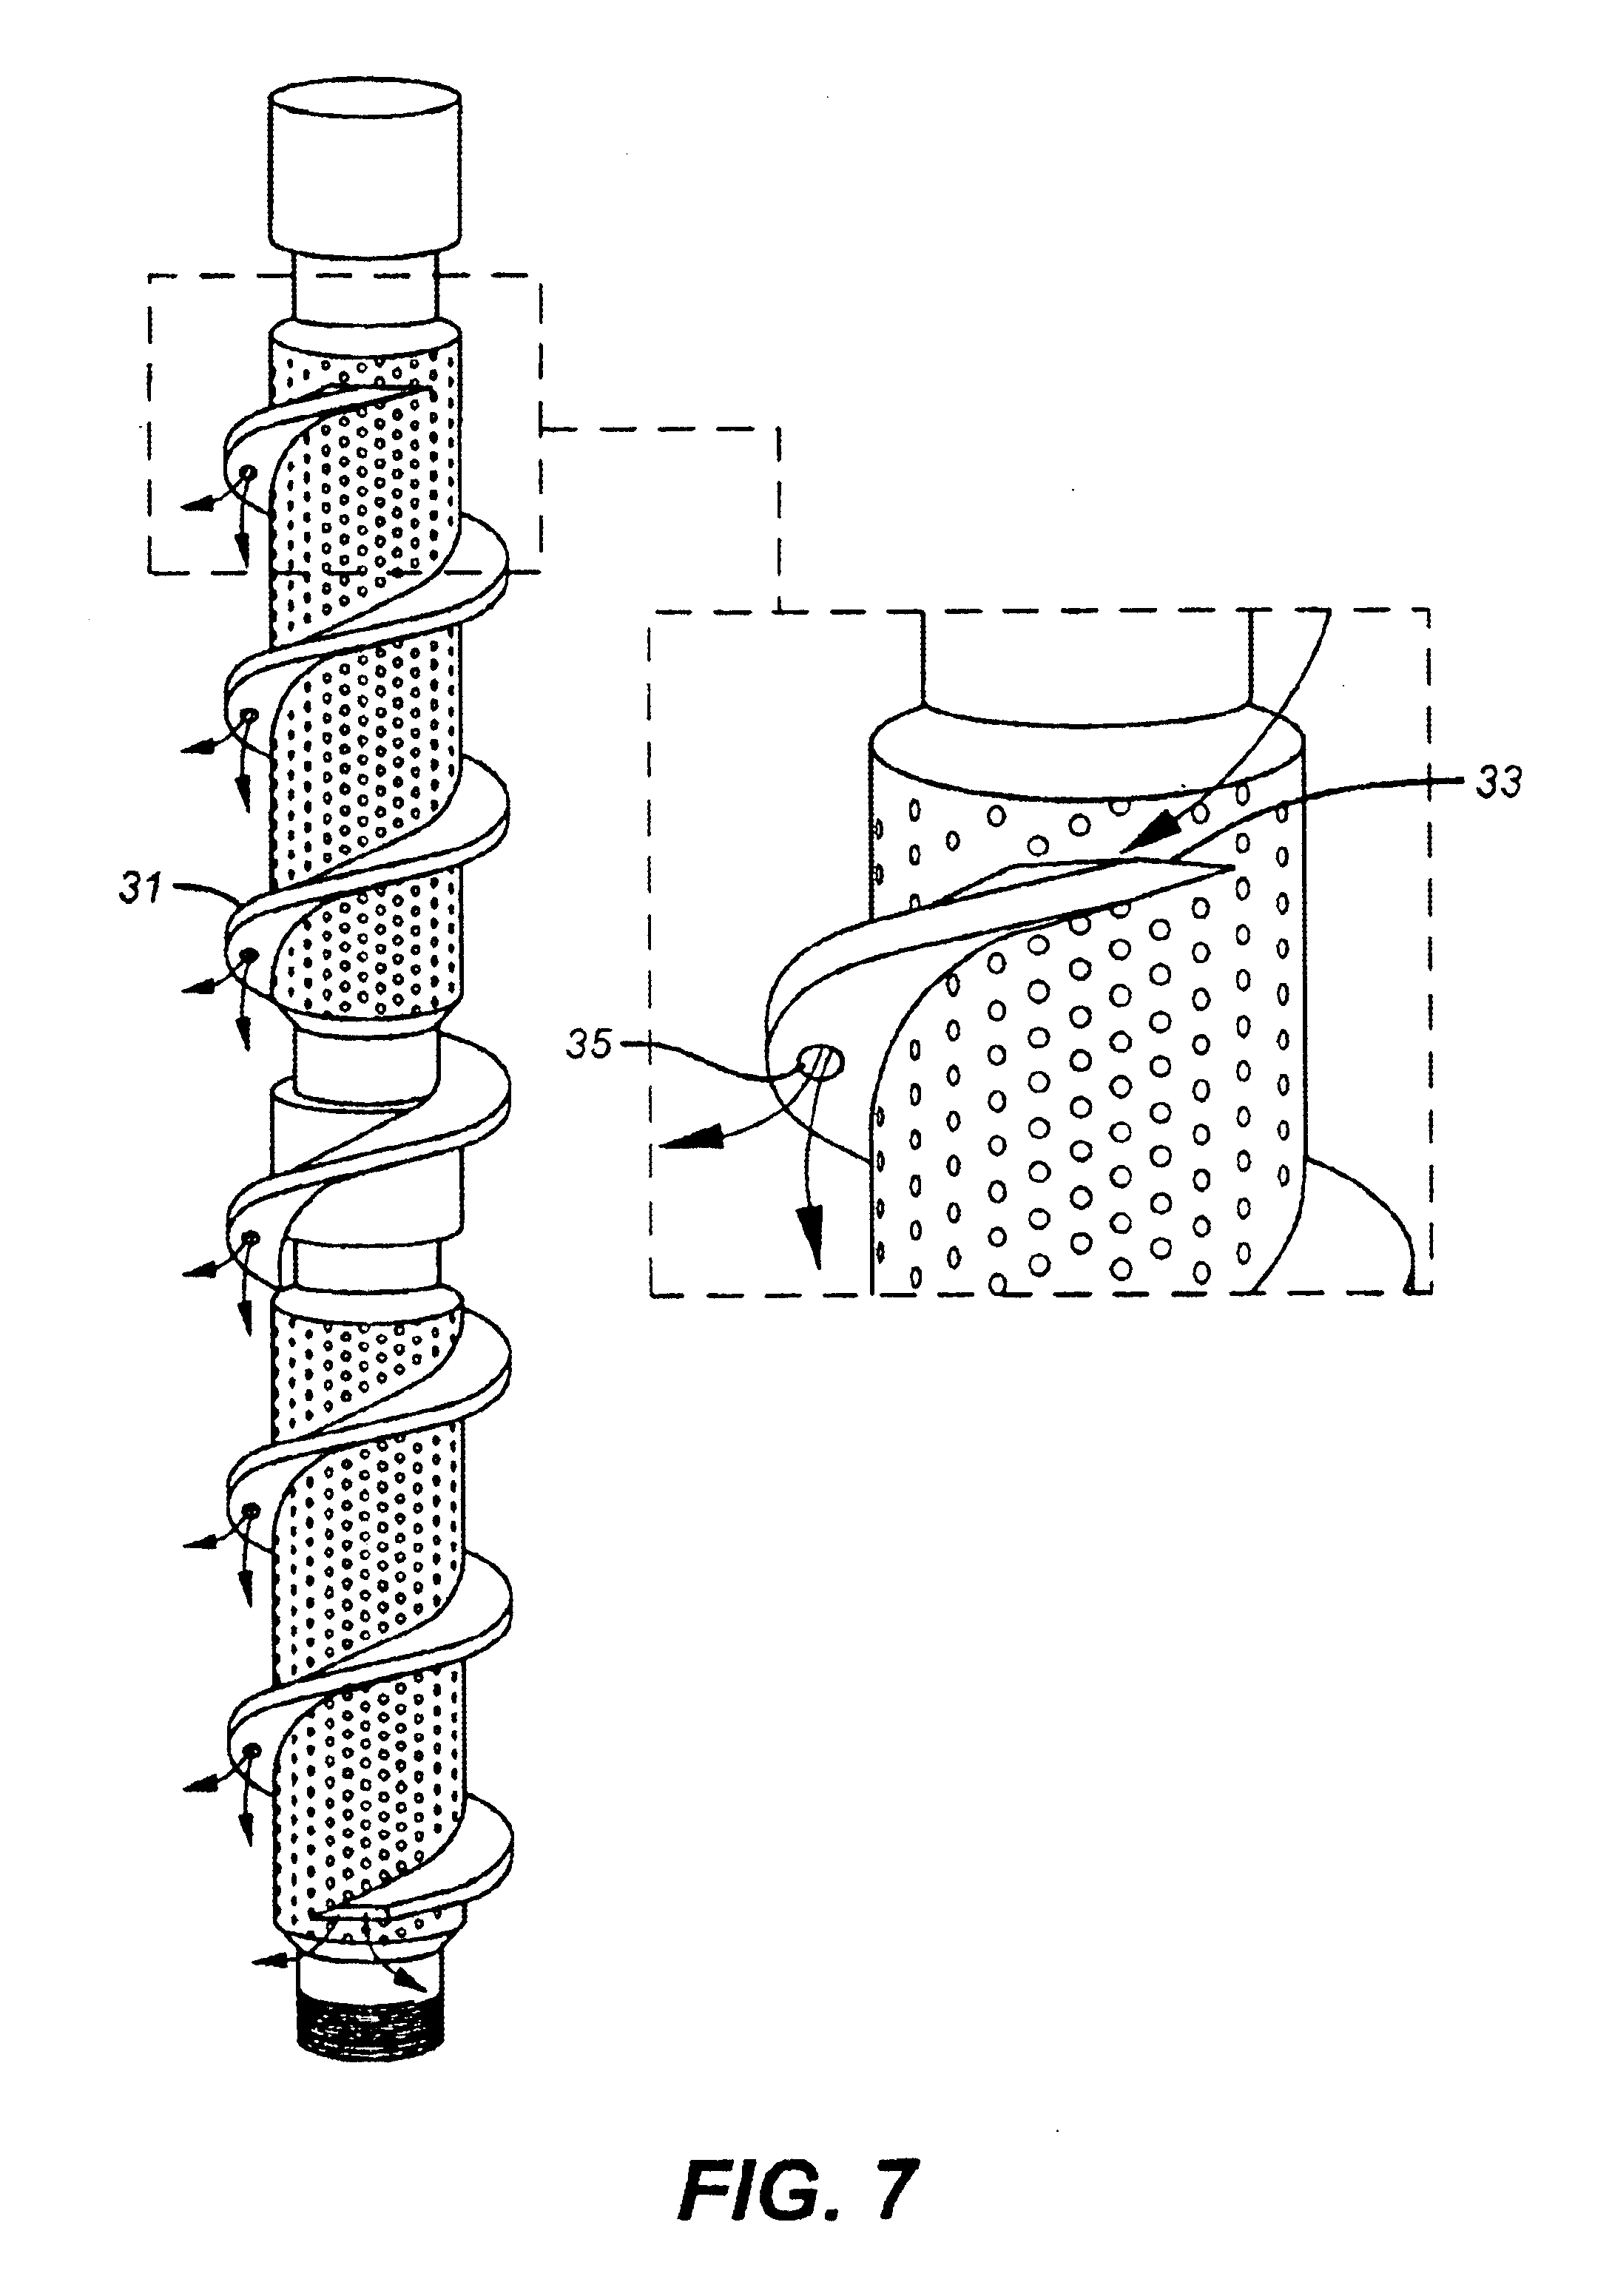 Gravel packing method using vibration and hydraulic fracturing